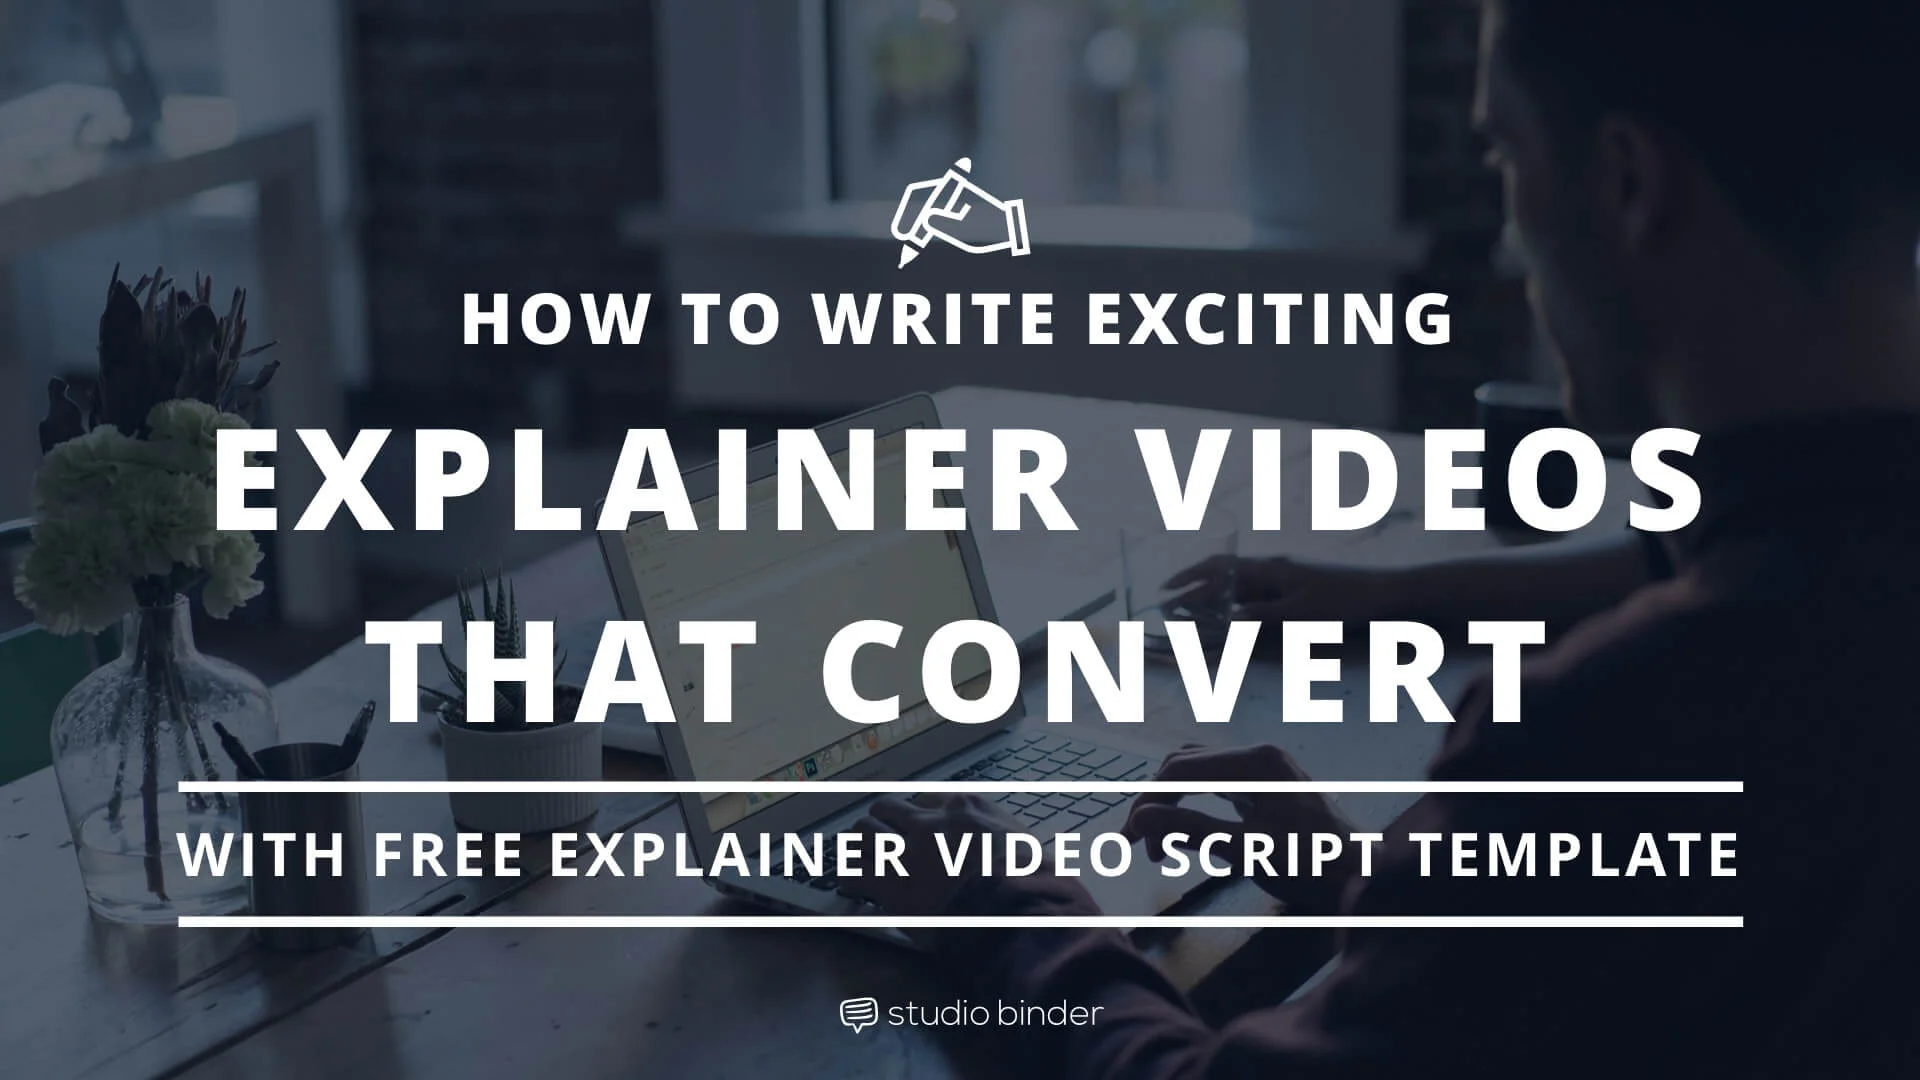 How to Write Exciting Explainer Explainer Videos That Convert (with FREE Explainer Video Script Template) - Social - StudioBinder